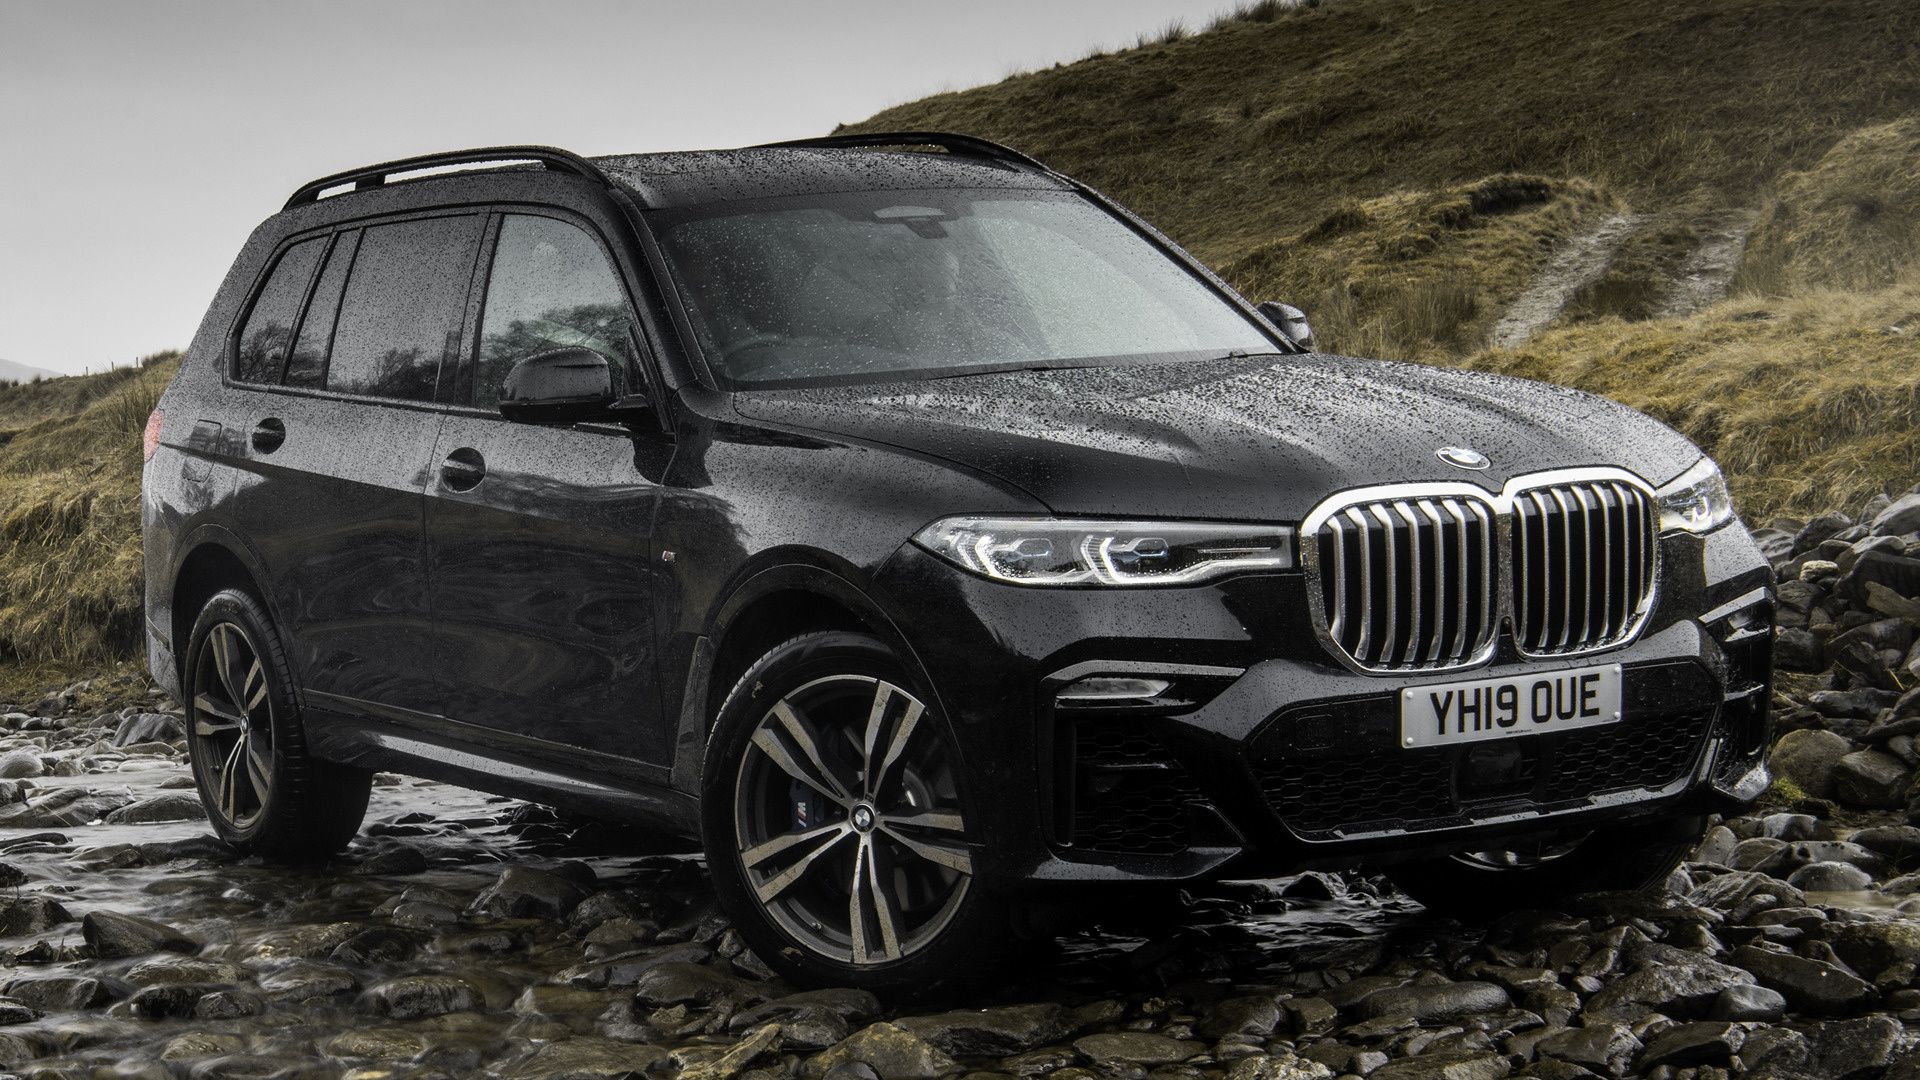 BMW X7 M Sport (UK) and HD Image